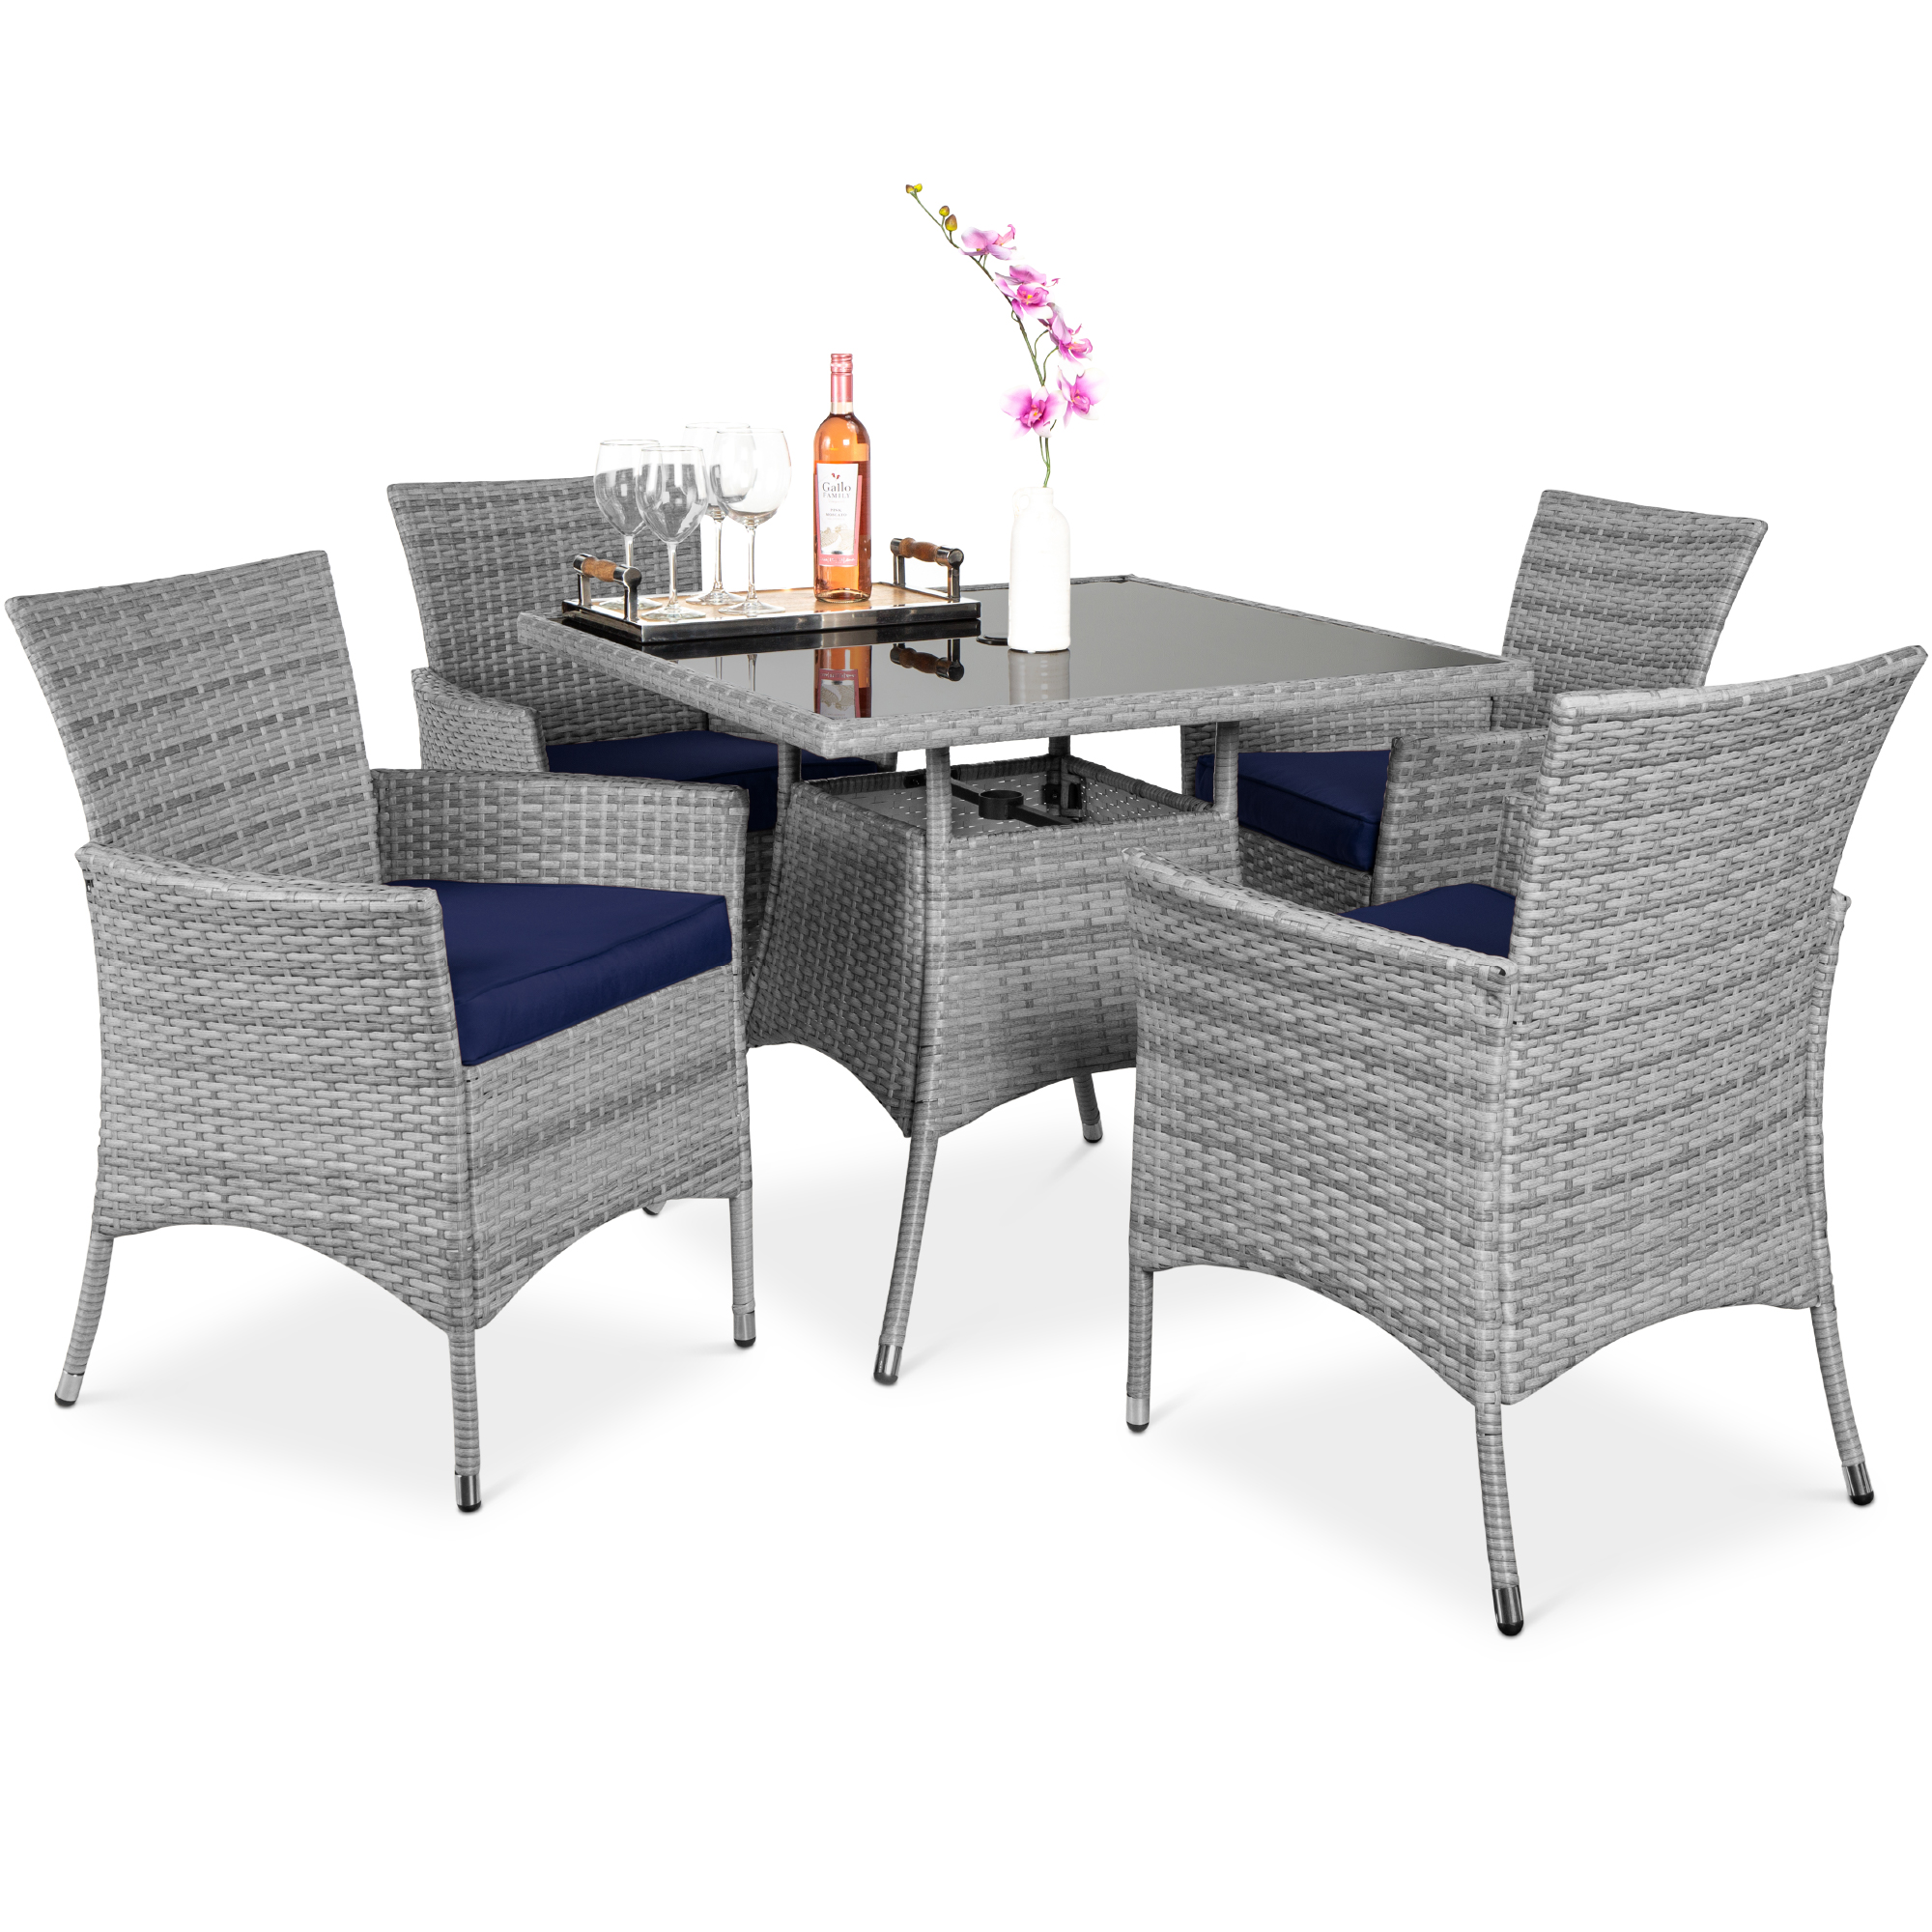 Best Choice Products 5-Piece Indoor Outdoor Wicker Patio Dining Table Furniture Set w/ Umbrella Cutout, 4 Chairs - Navy - image 1 of 7